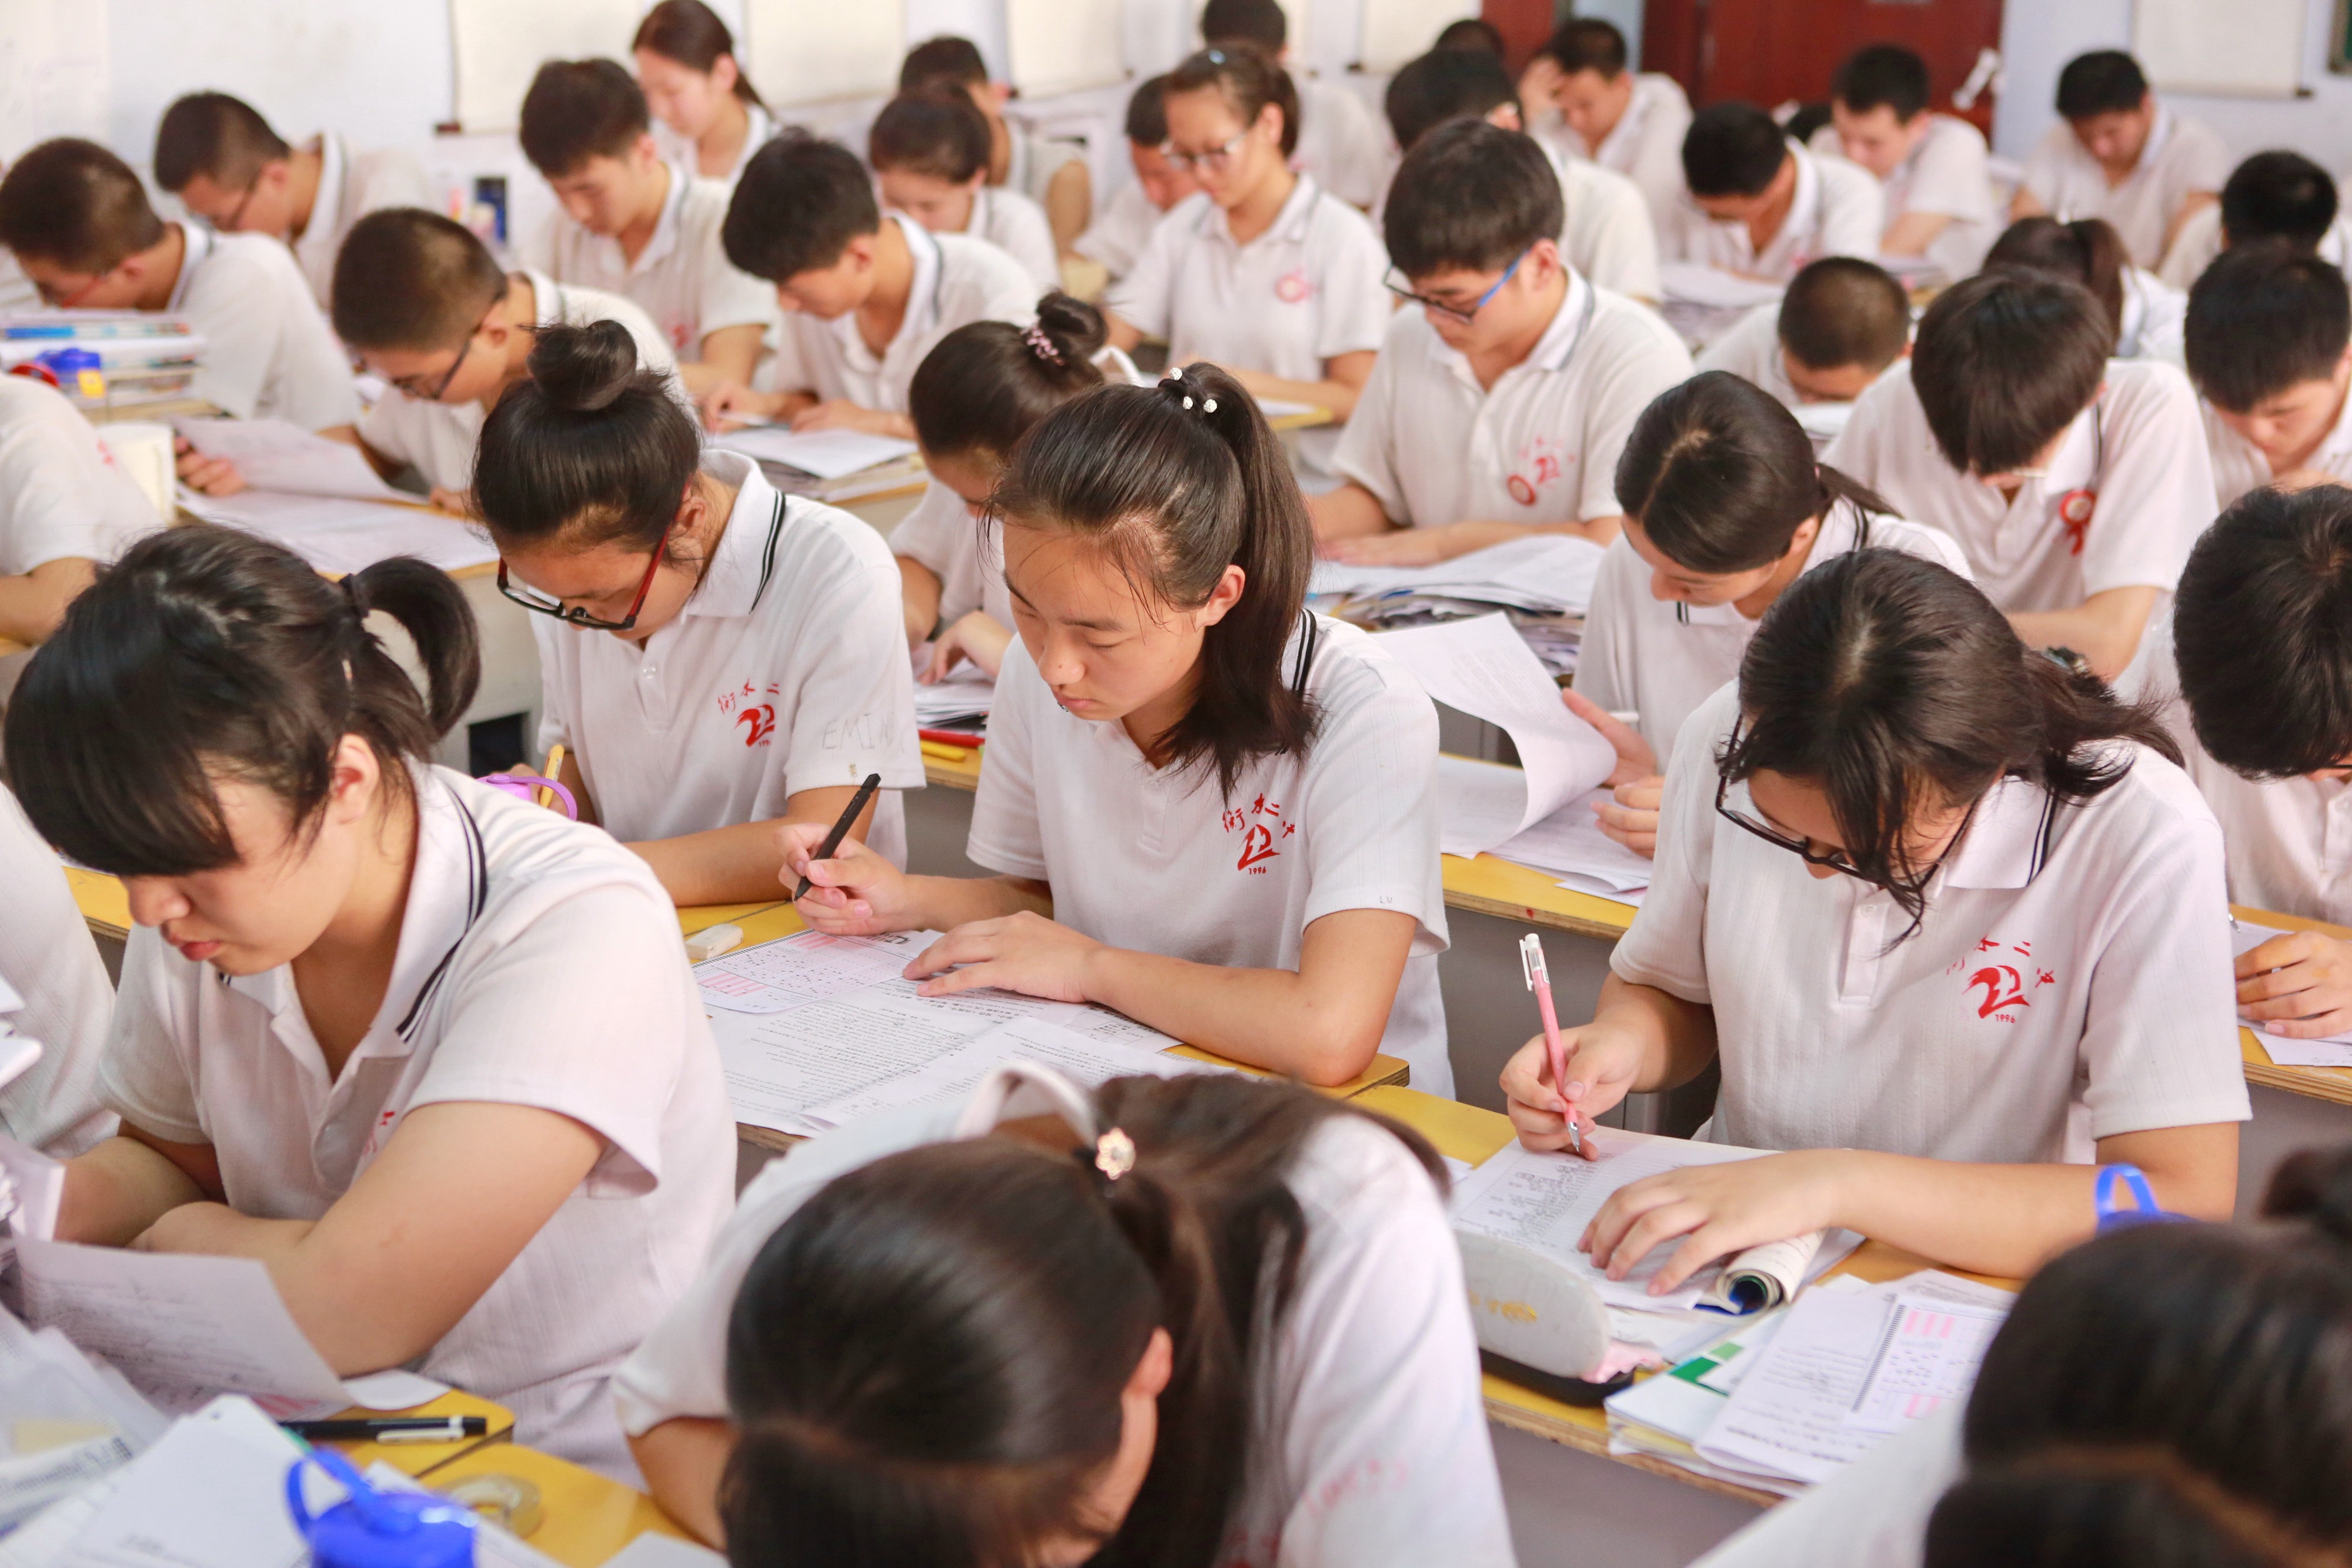 Candidates for the national college entrance exam revise at No. 2 Middle School in Hengshui, Hebei province, China, in June 2017. As competition for entry to China’s universities intensifies, the education sector has flourished. Photo: Xinhua